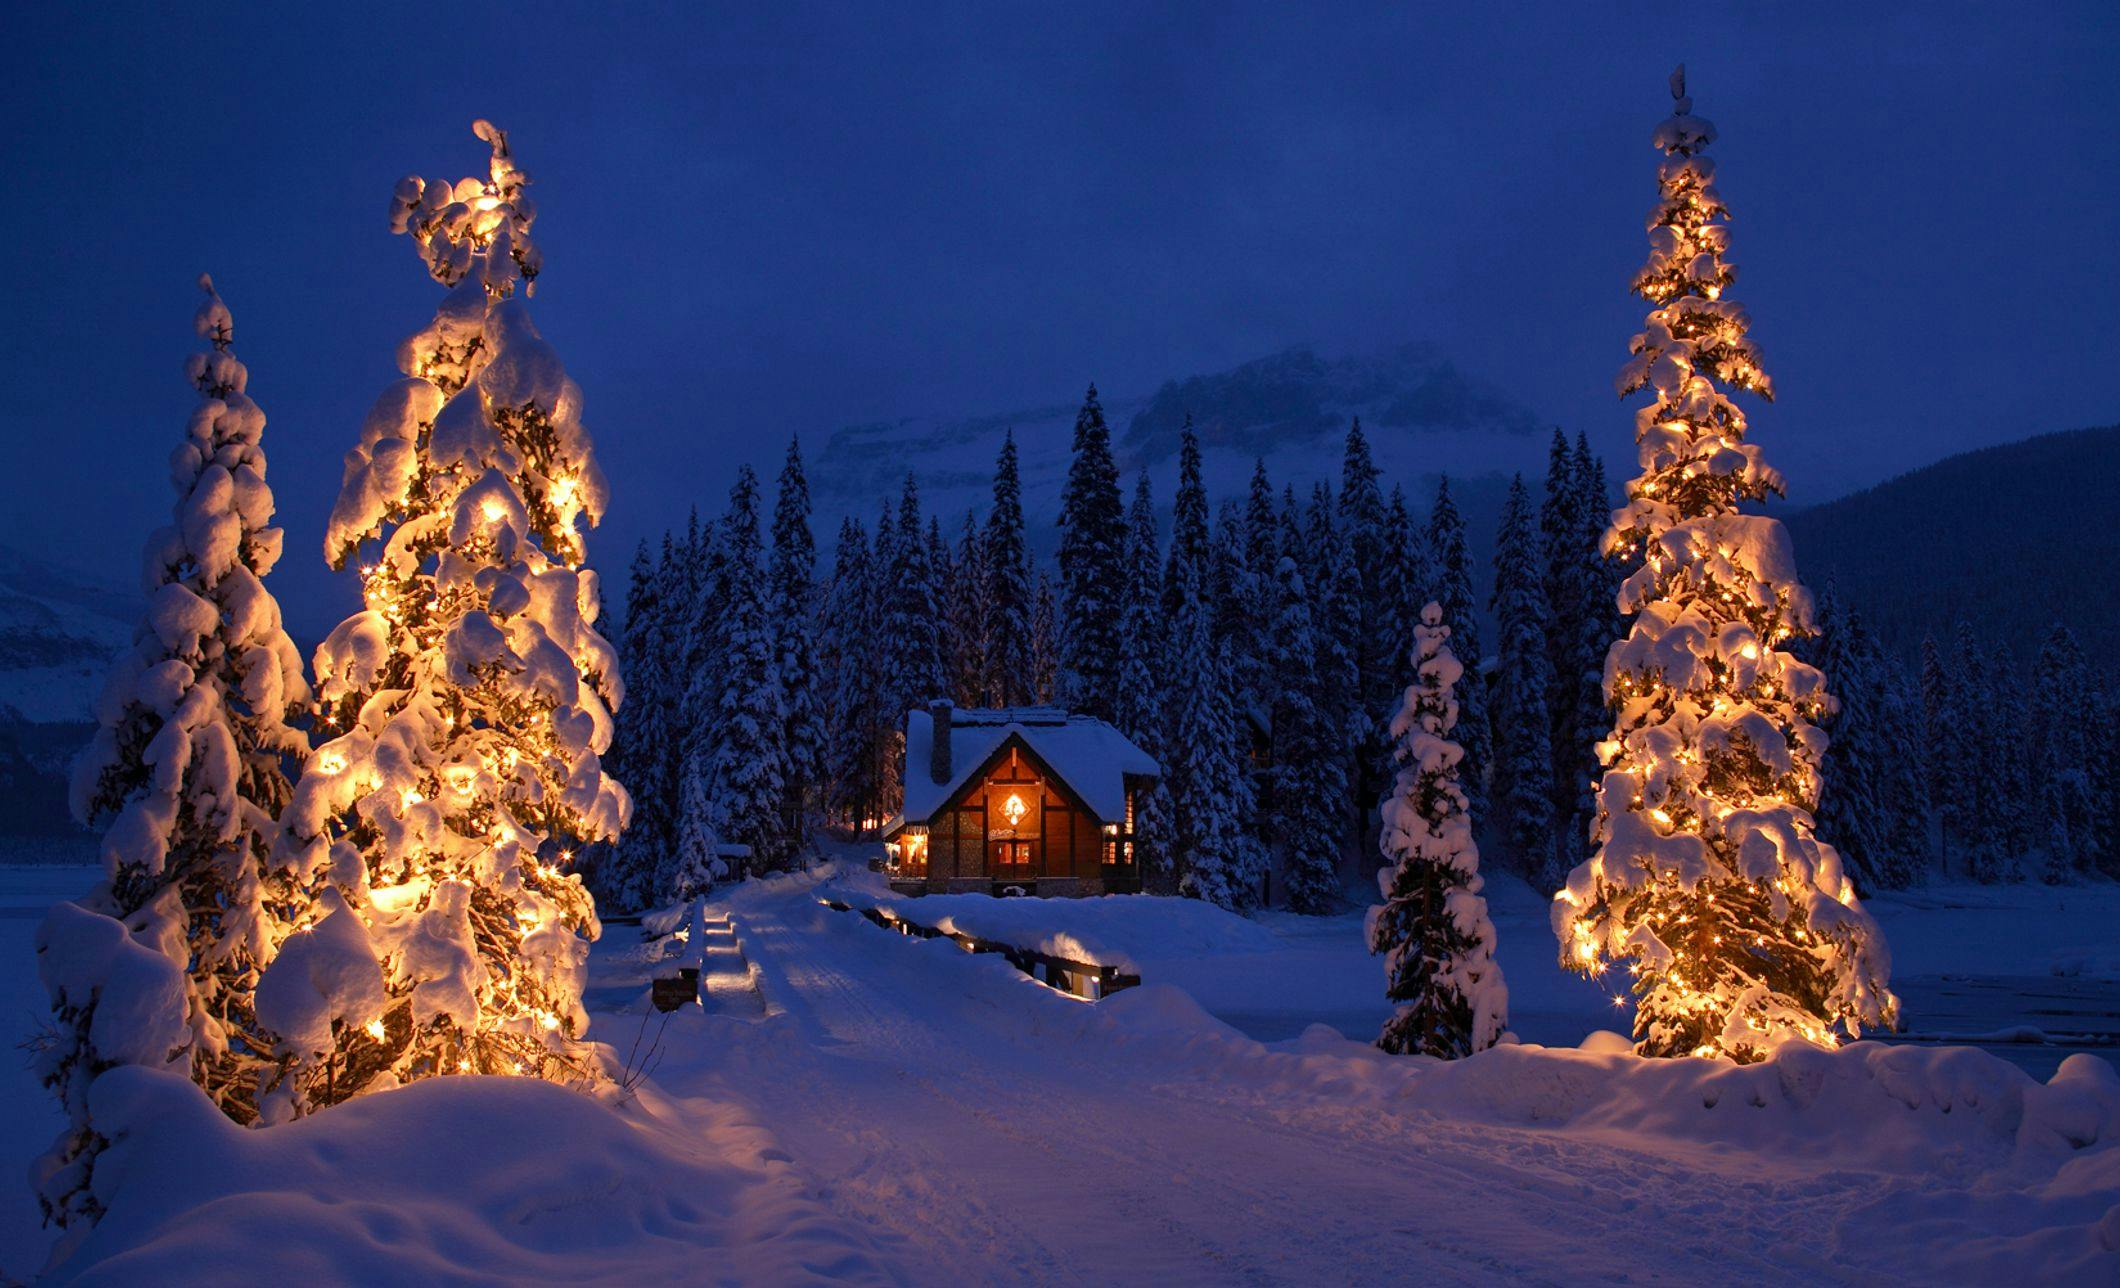  Two snow covered trees with Christmas lights framing a road leading to a cozy cabin in the background